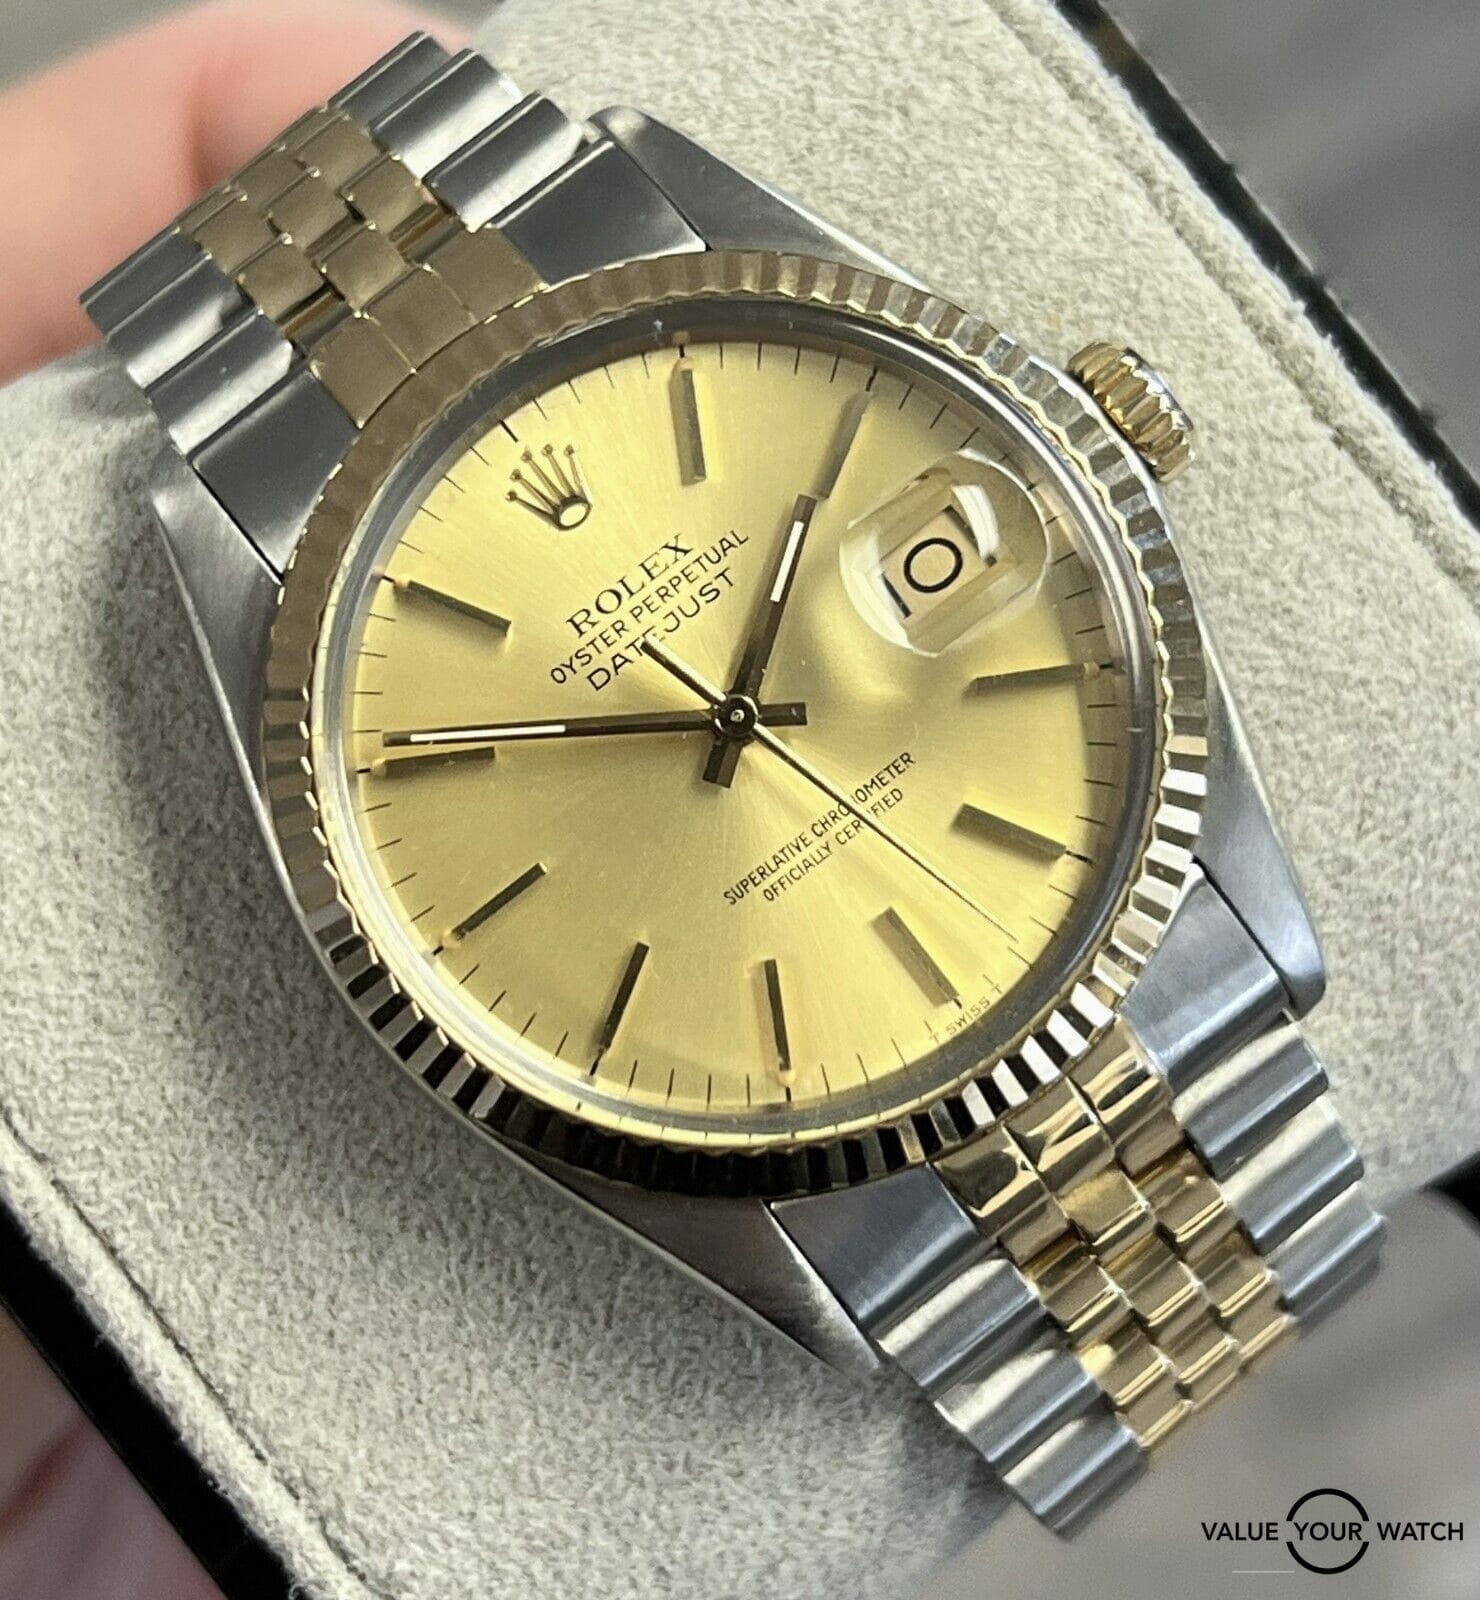 1986 Rolex Datejust 36mm 16013 18K Yellow Gold & Stainless Steel!